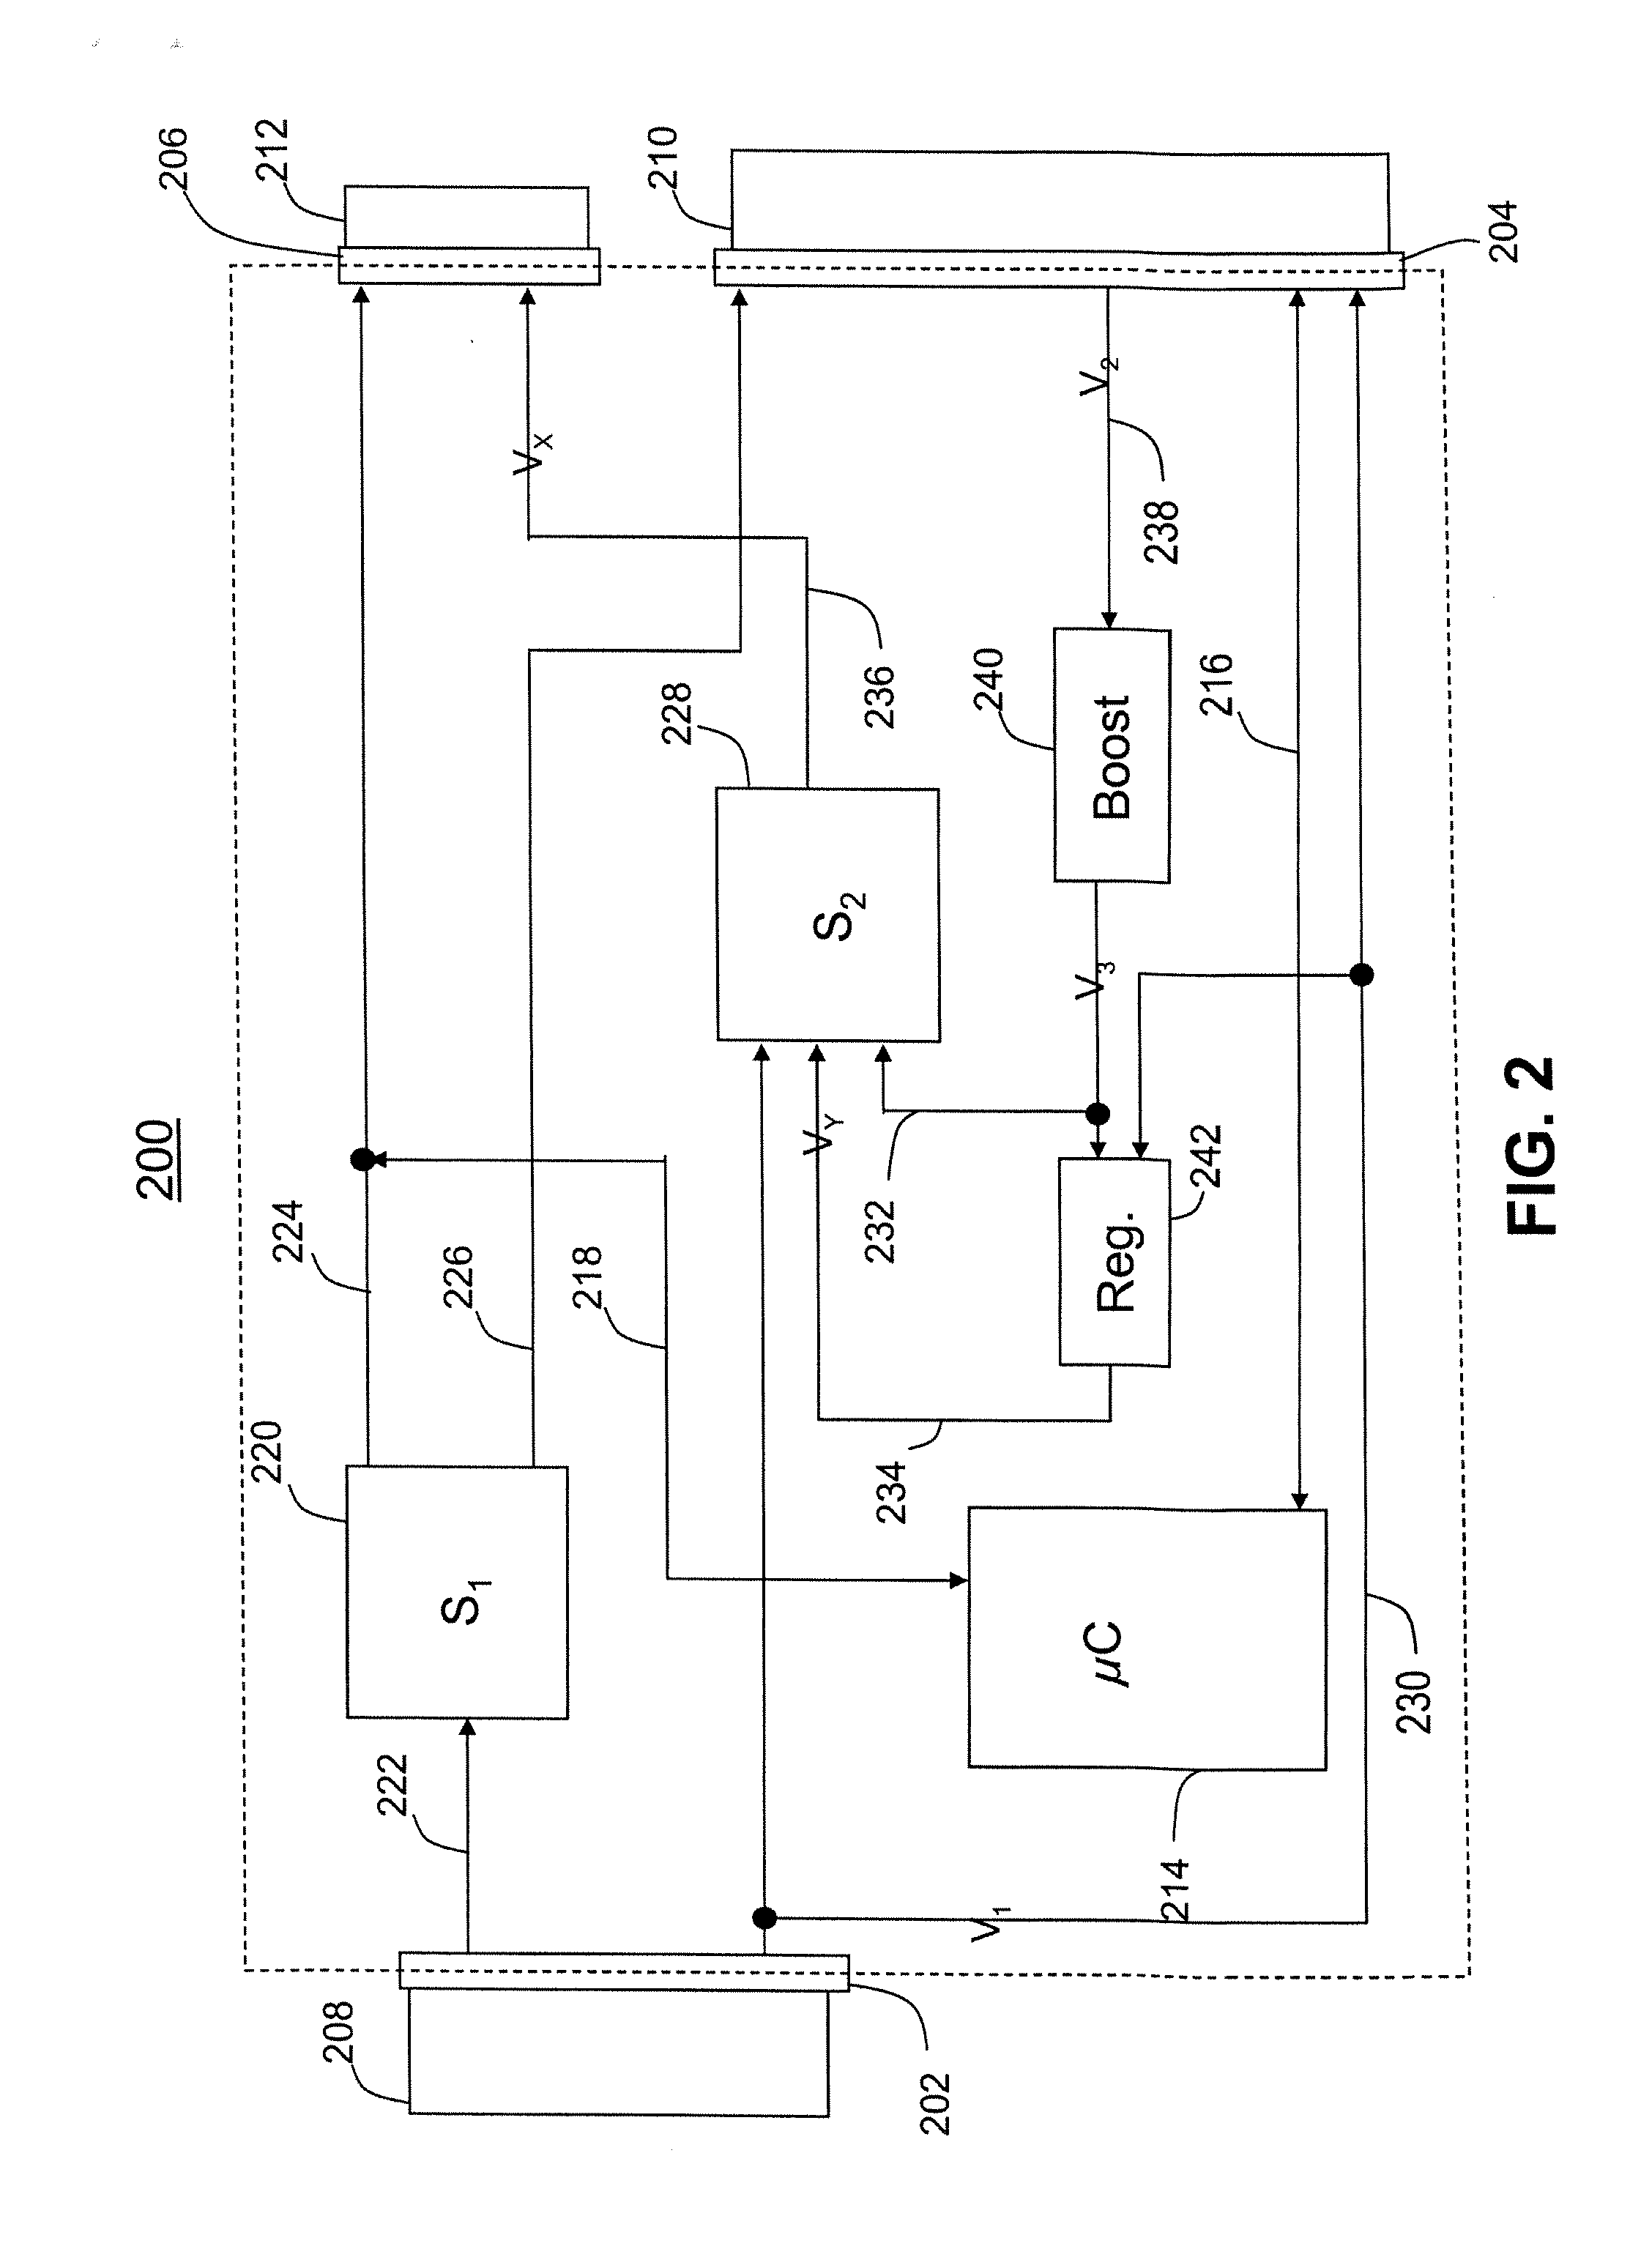 Apparatuses and methods that facilitate the transfer of power and information among electrical devices